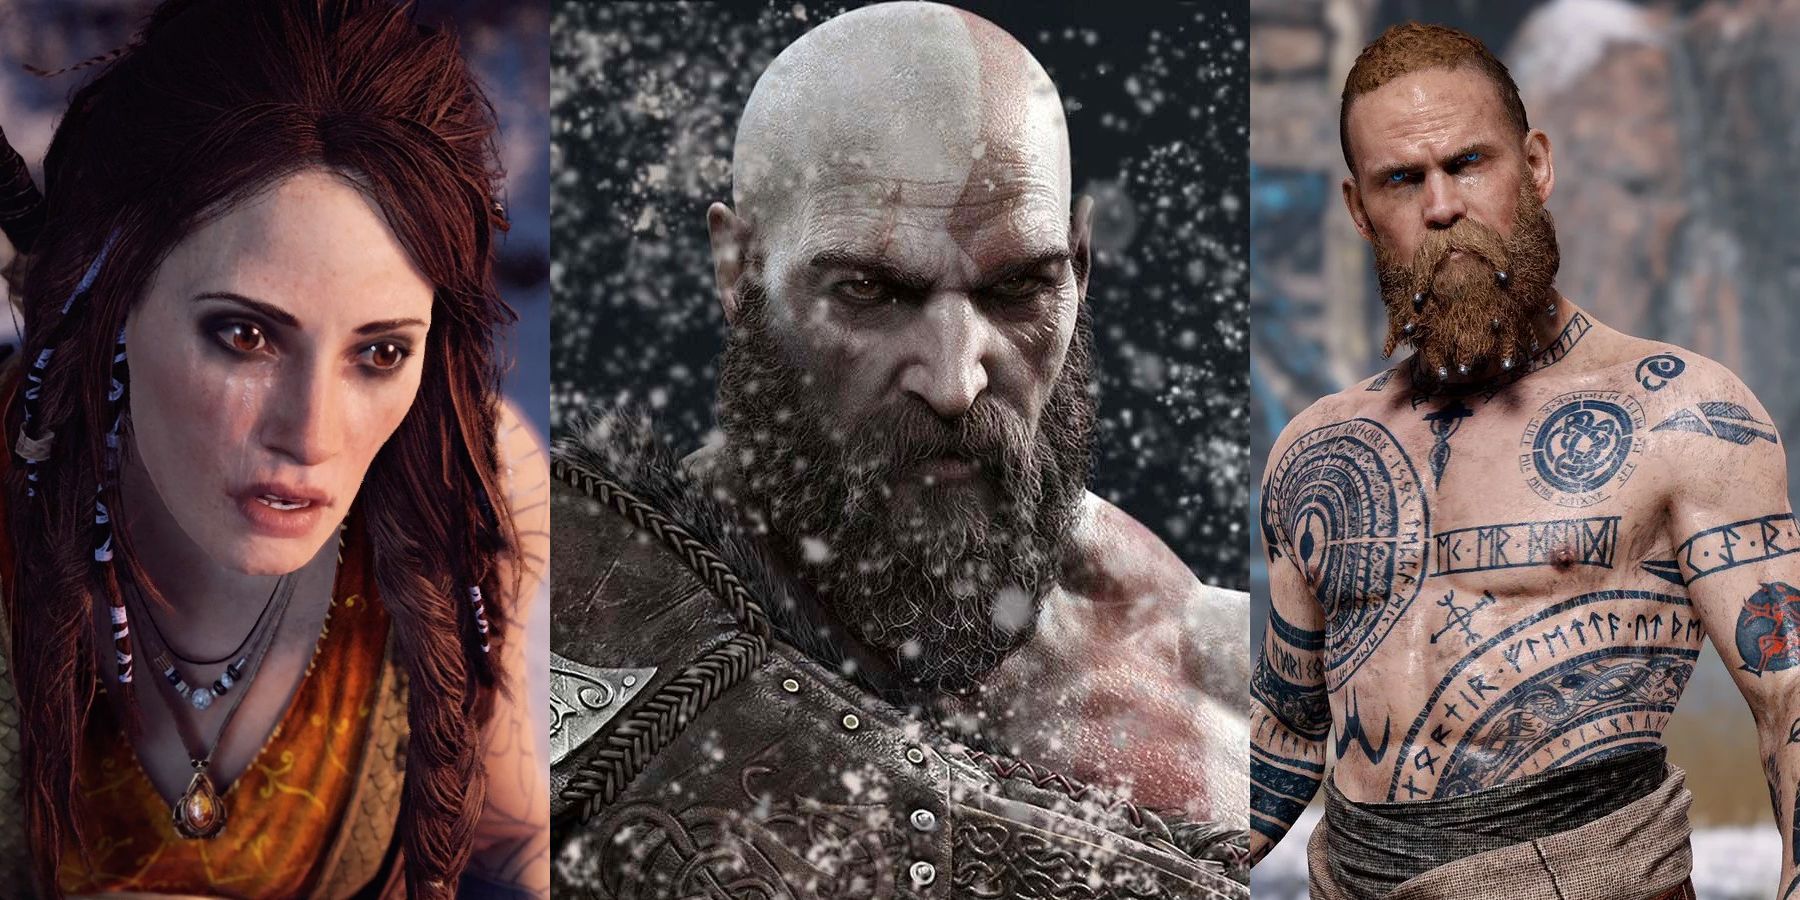 who would win in a war. the Greek gods or the aesir gods : r/GodofWar